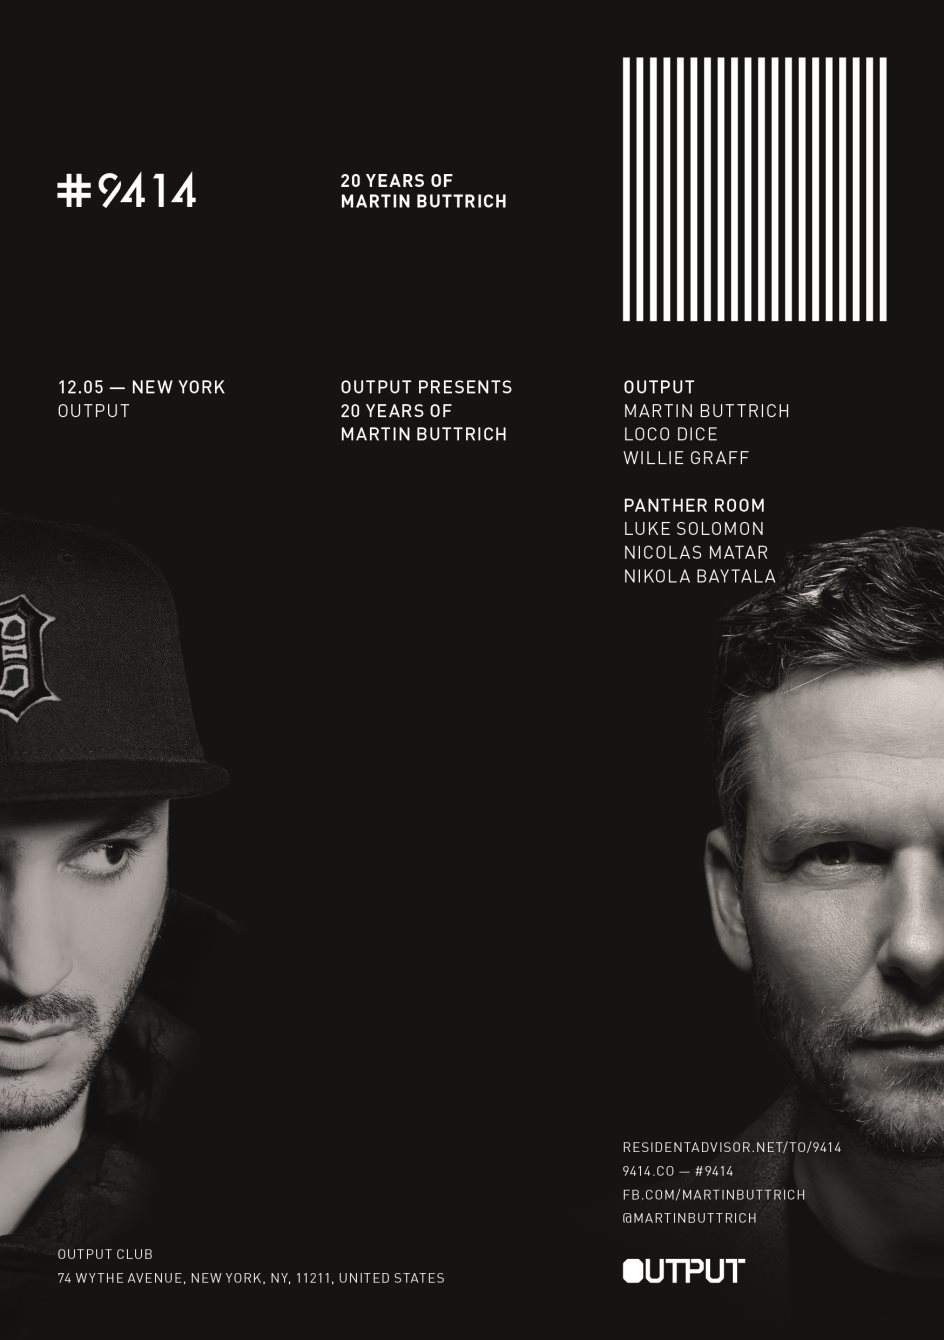 #9414 Martin Buttrich 20 Years Tour with Loco Dice/ Willie Graff and Luke Solomon - Página frontal